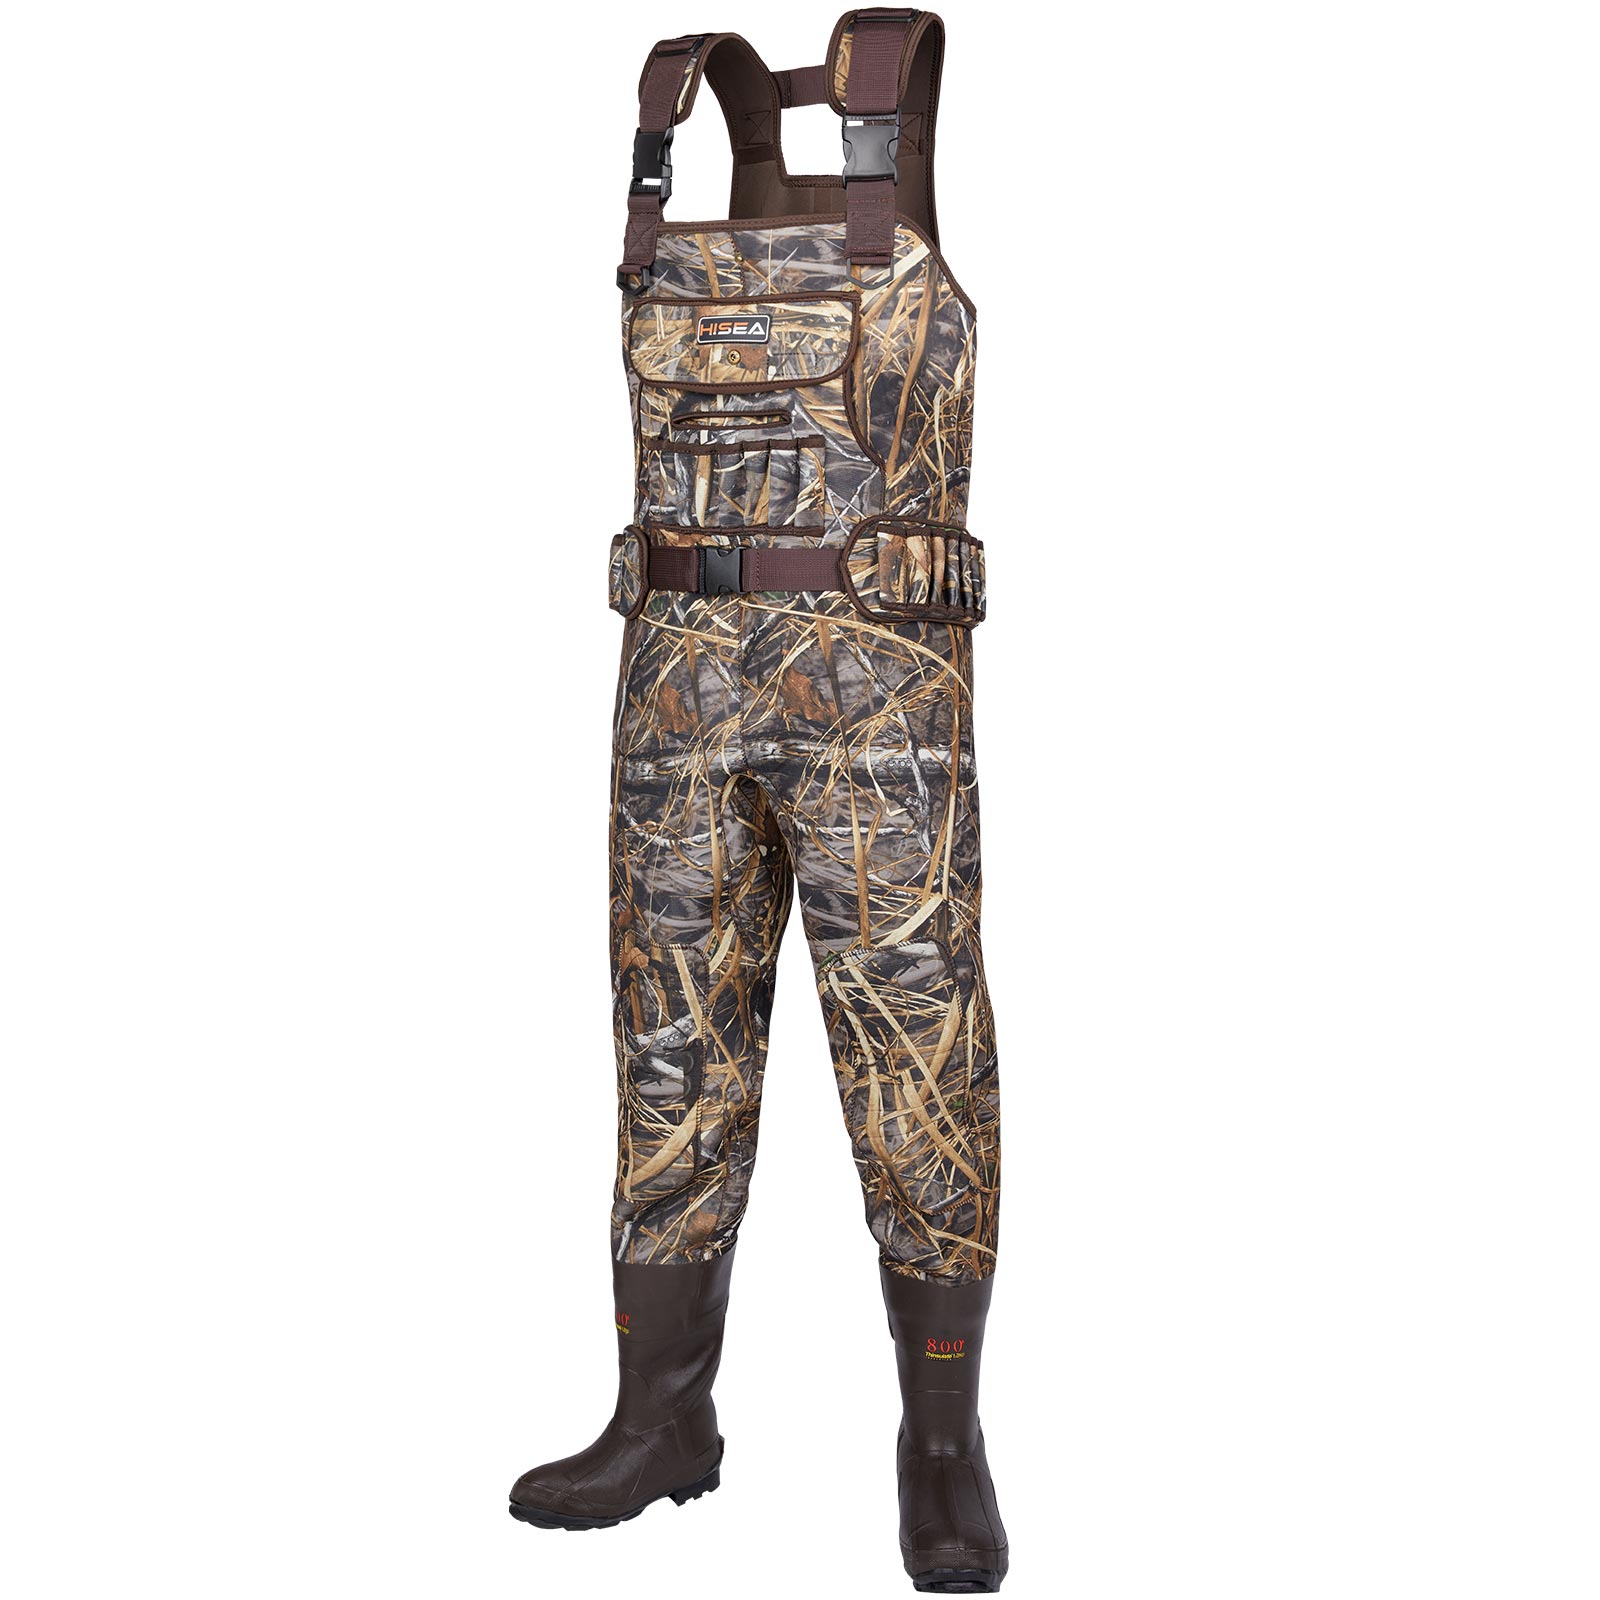 HISEA Hunting Chest Waders for Men with 800G Insulated Boots Waterproof Neopr... 